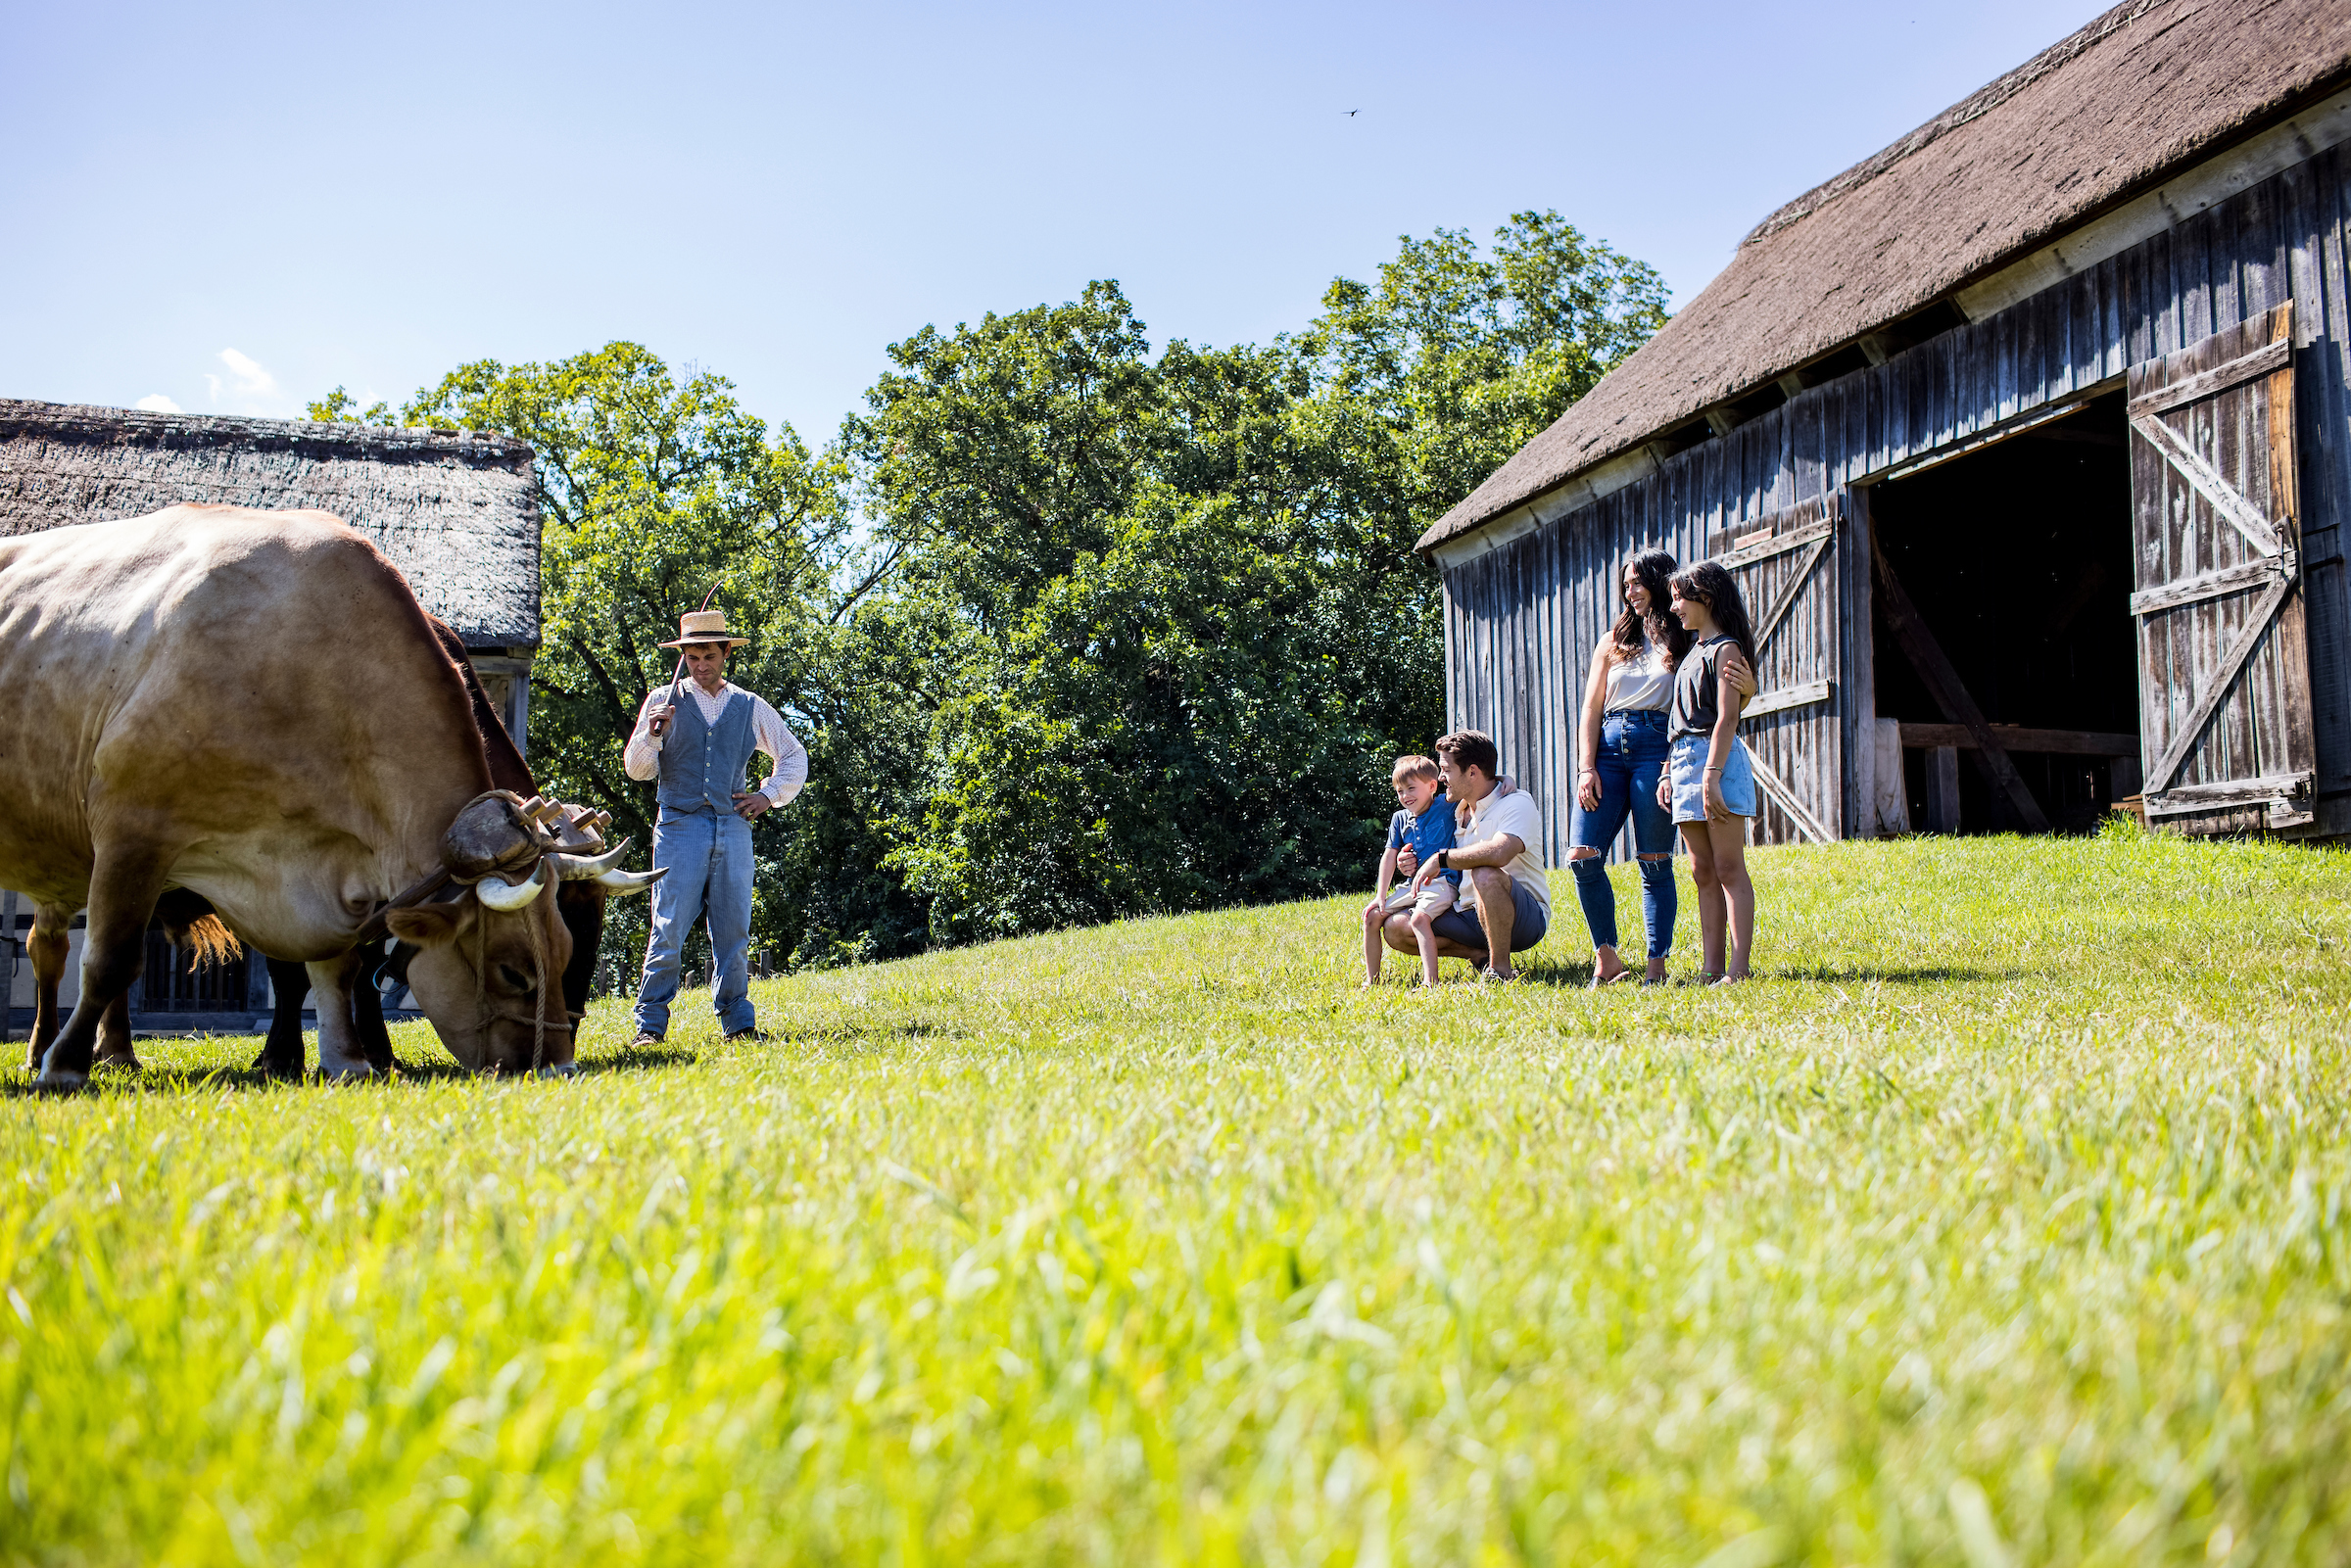 A man wearing period clothes including a black hat helps guide two long horned cattle attached to a plow harness to eat grass while a family looks on from in front of an open barn